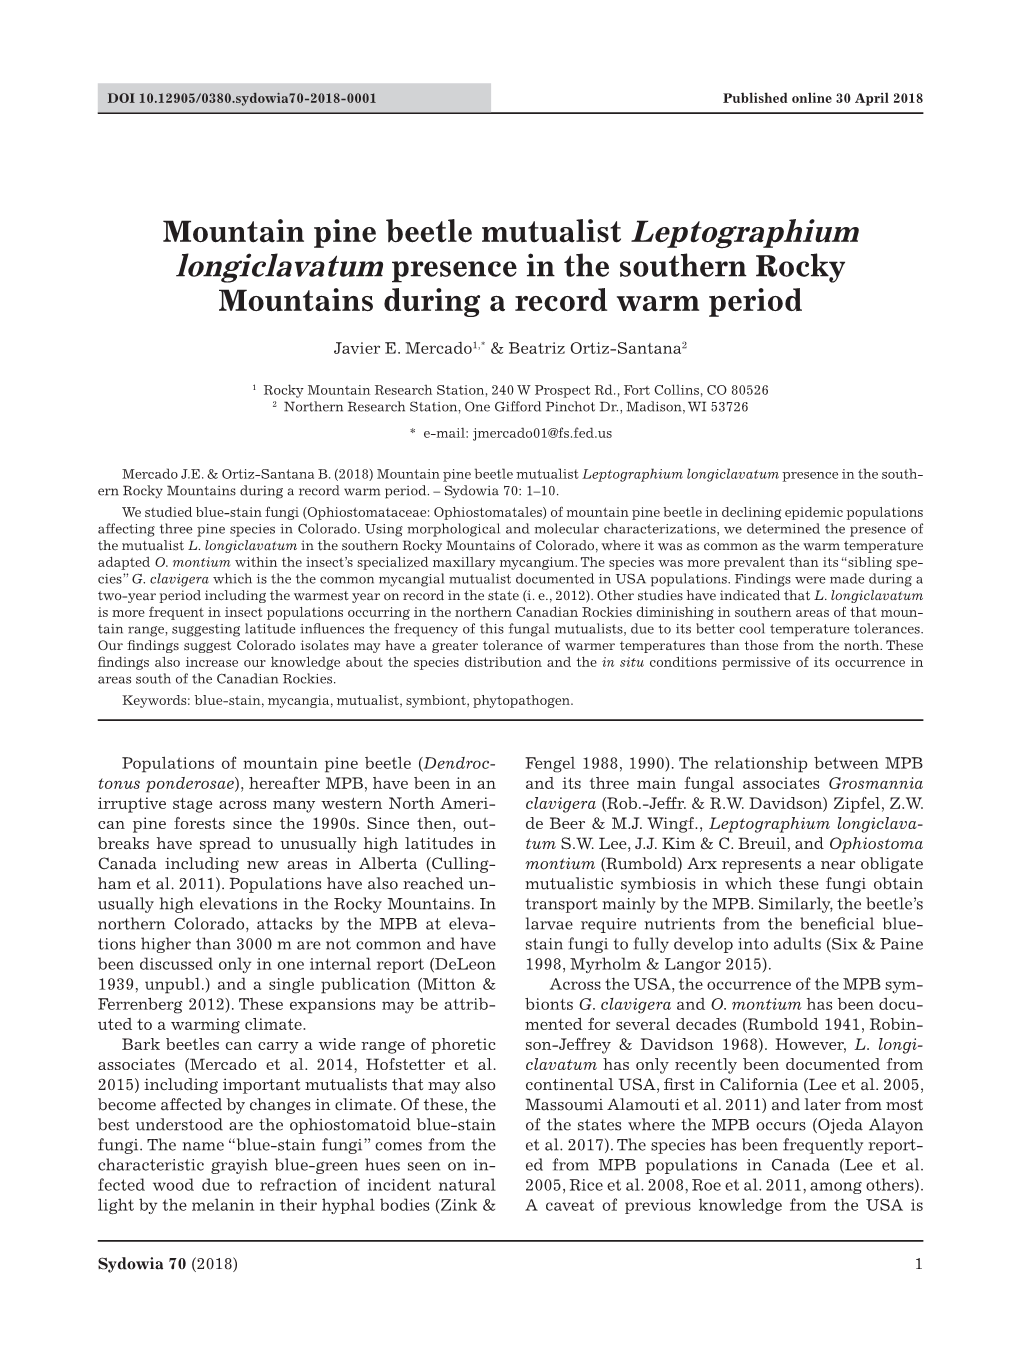 Mountain Pine Beetle Mutualist Leptographium Longiclavatum Presence in the Southern Rocky Mountains During a Record Warm Period